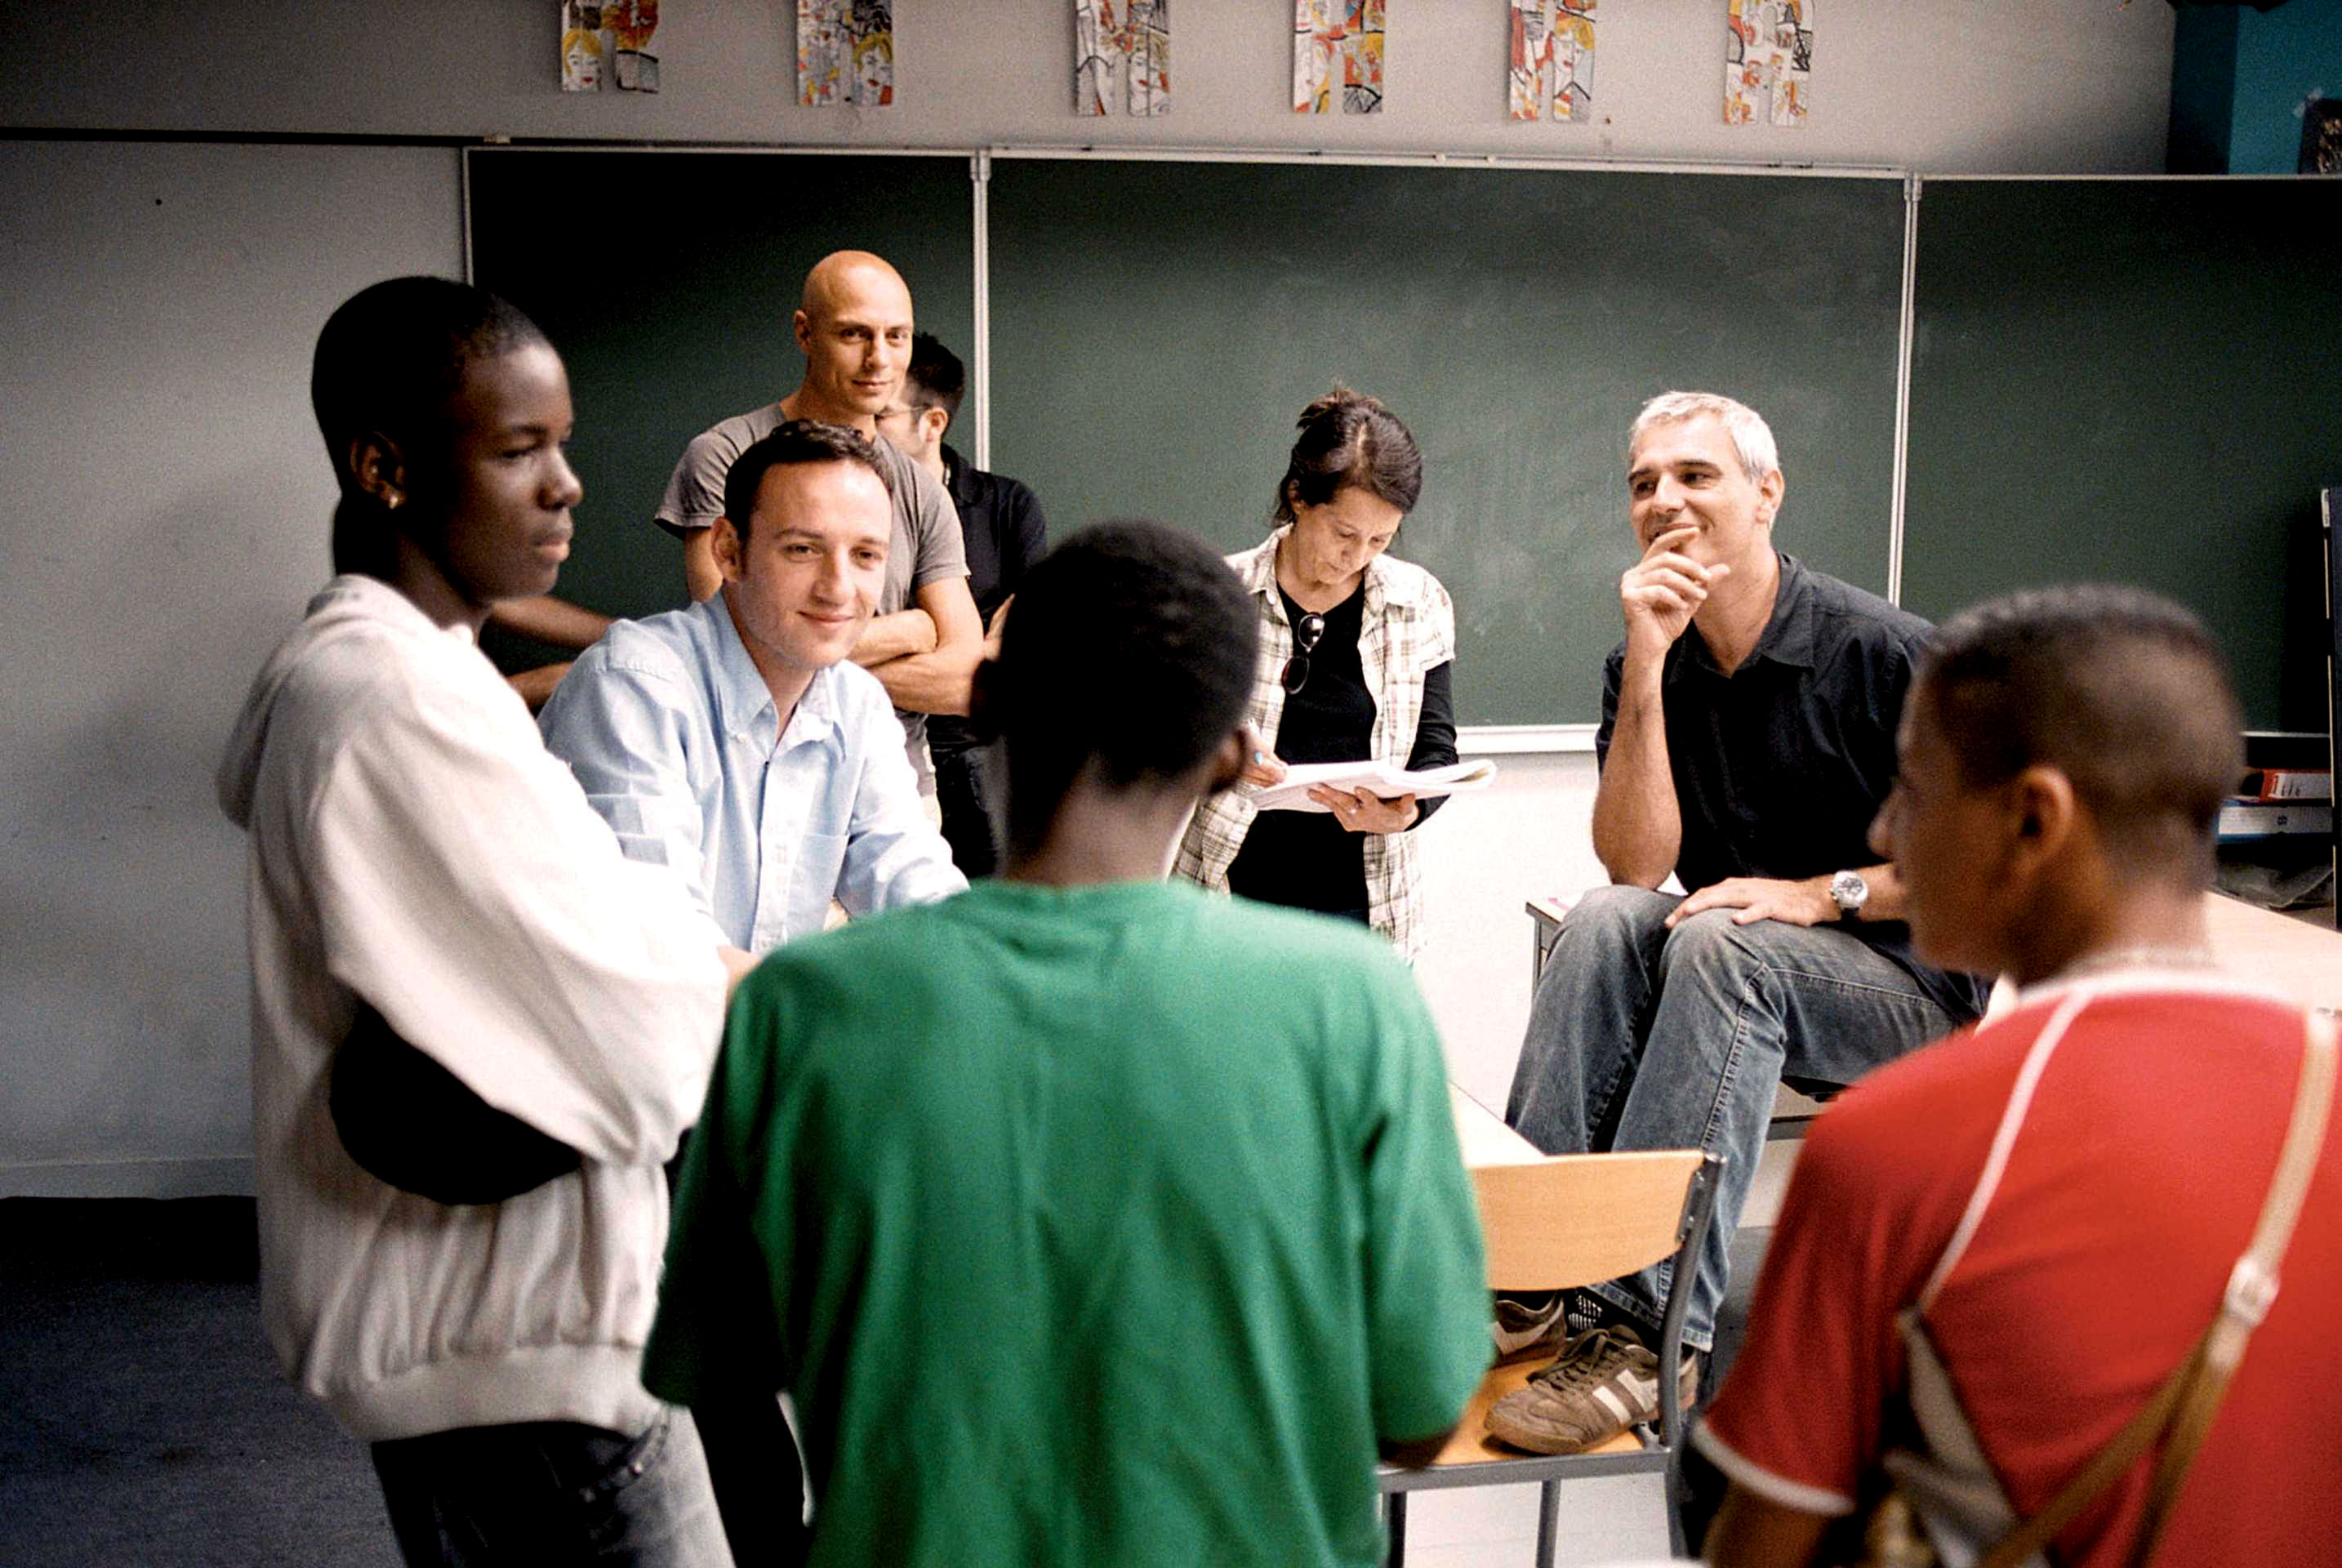 Frank Keita, Francois Begaudeau and Laurent Cantet in Sony Pictures Classics' The Class (2008). Photo credit by Pierre Milon.